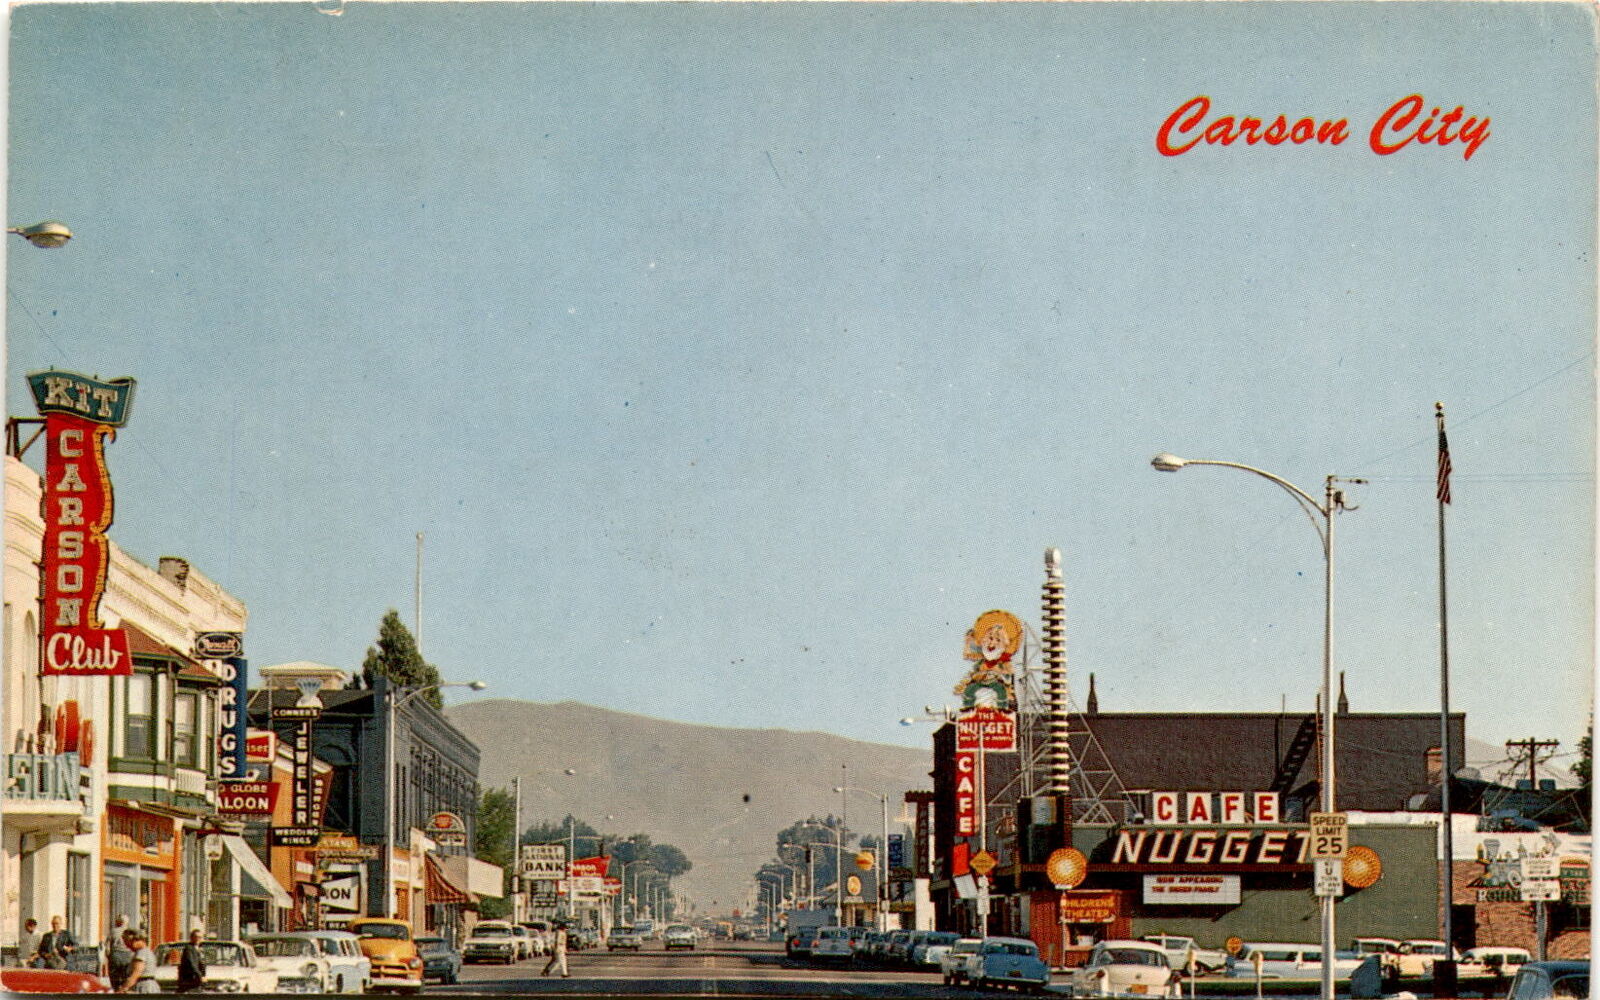 Discover Carson City, Nevada: history, entertainment, and dining postcard